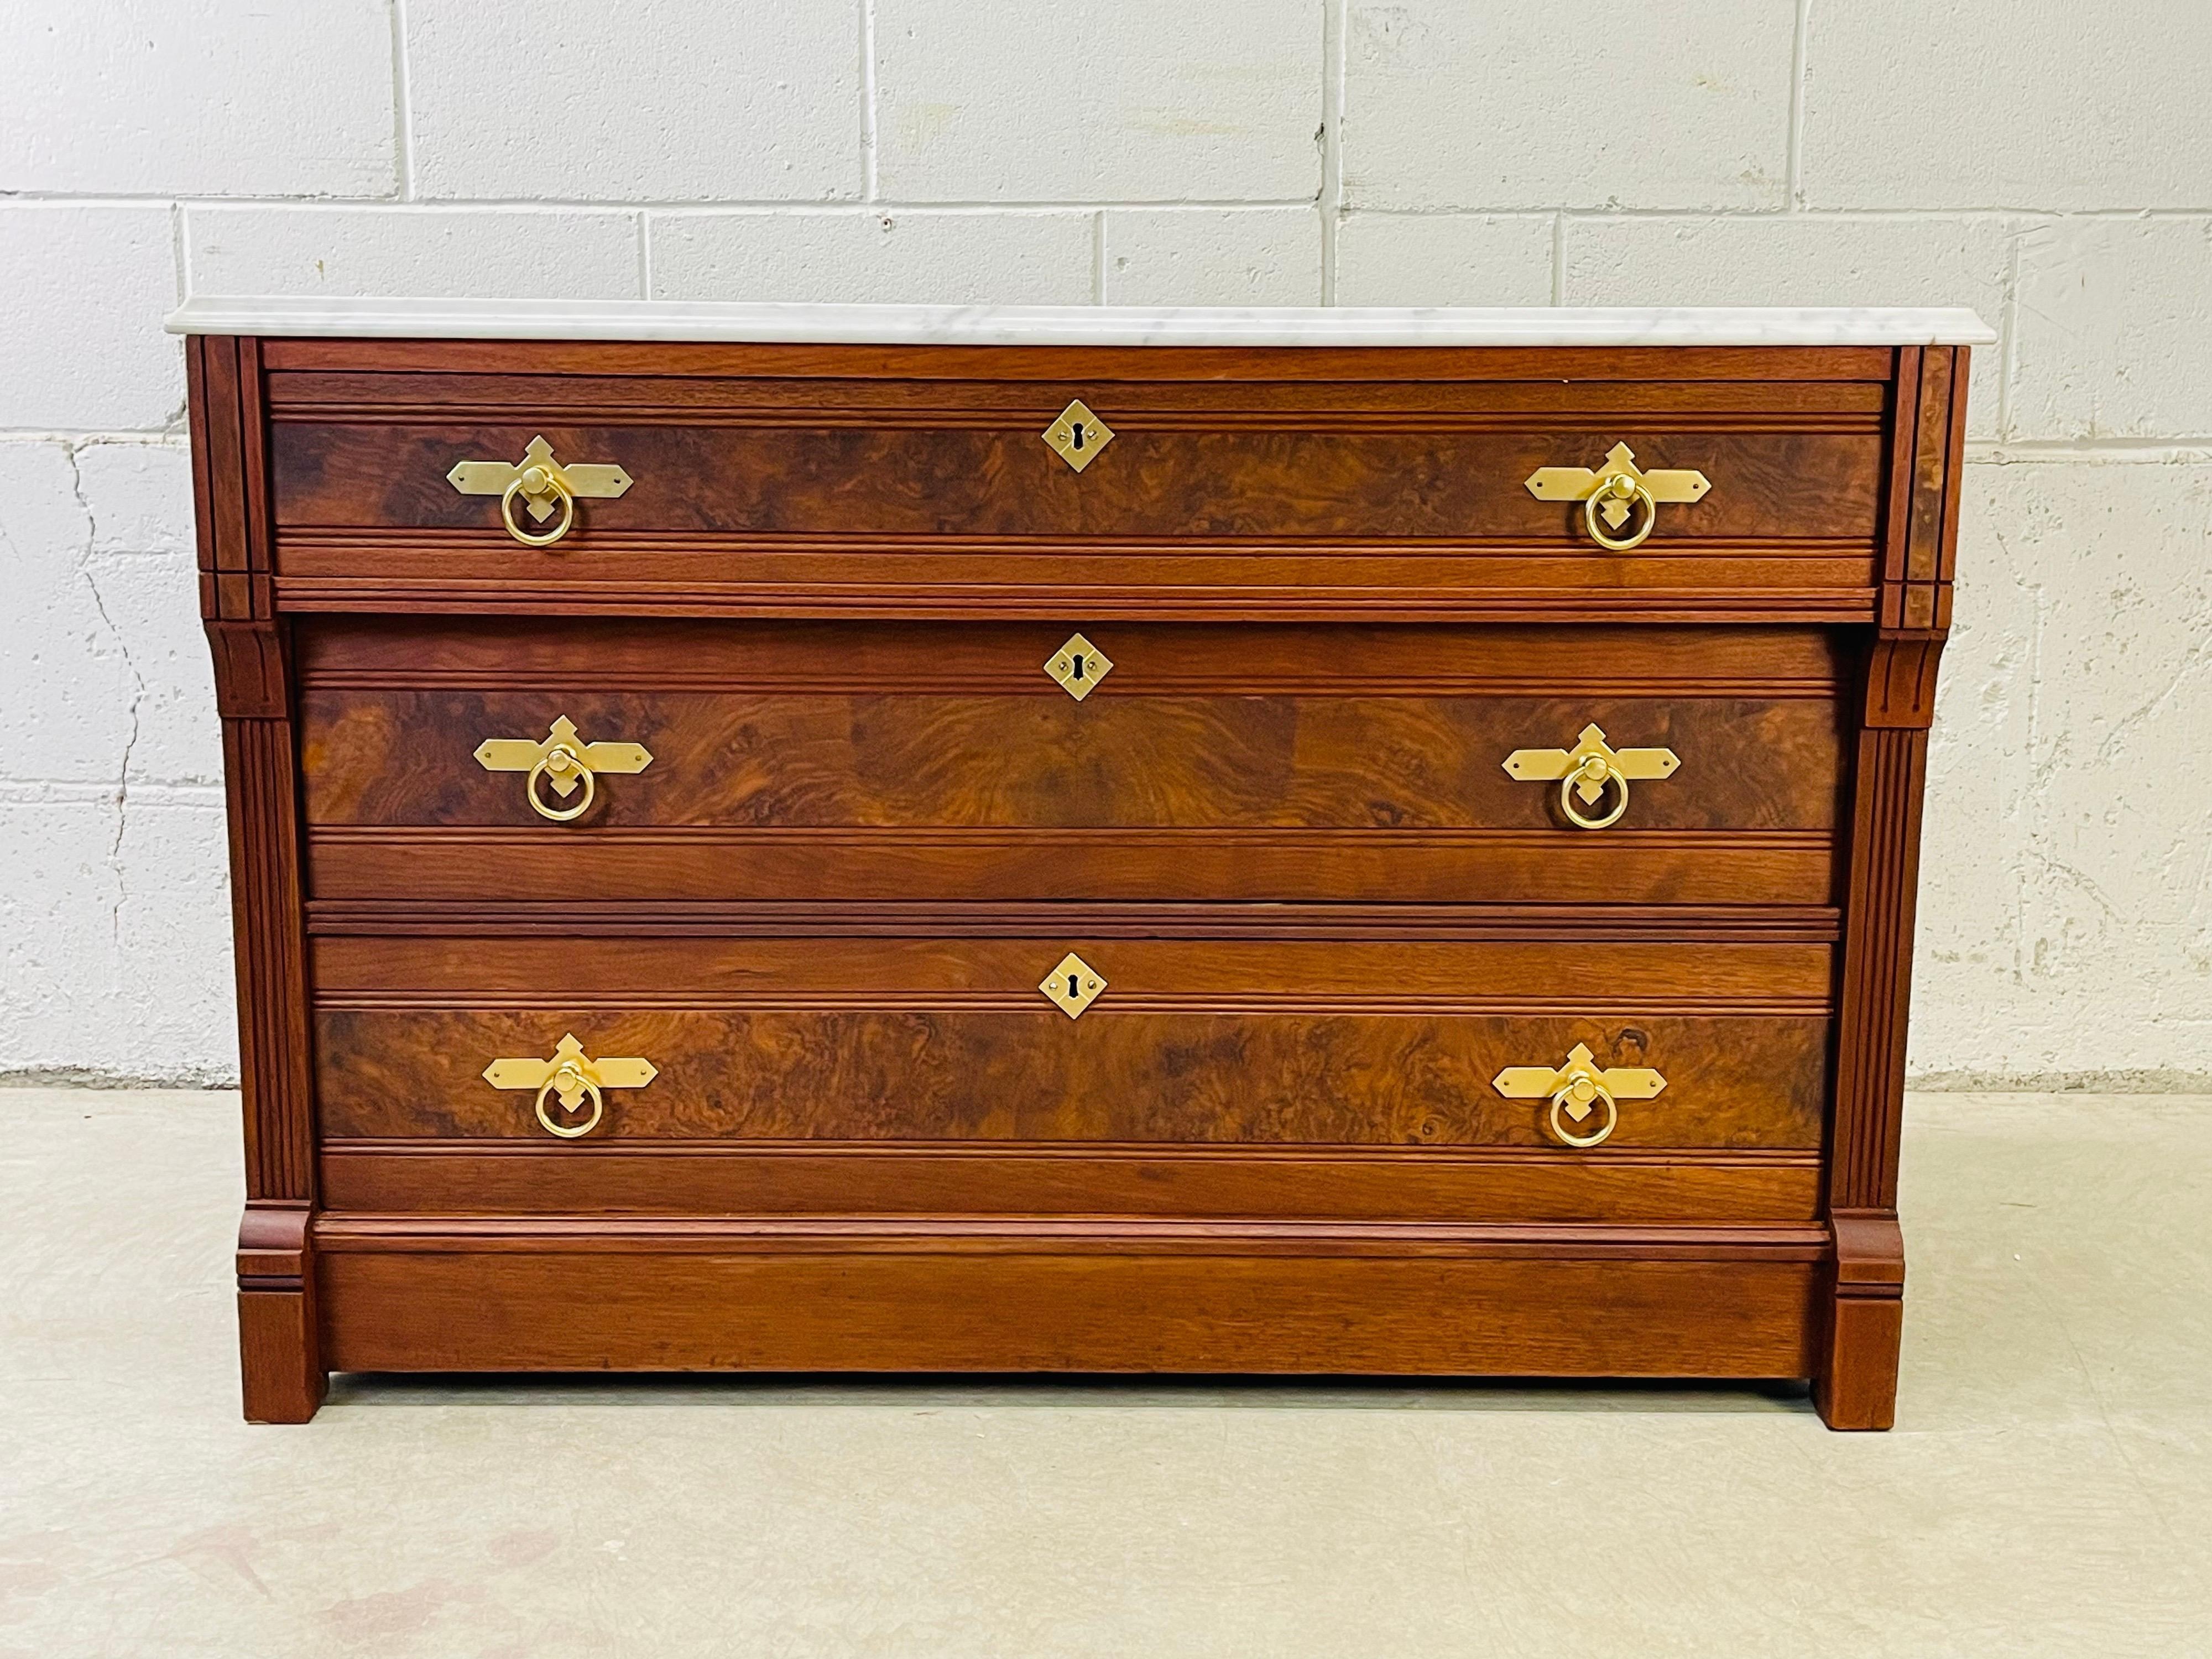 Antique Victorian black walnut wood and marble top low dresser. The dresser has three drawers for storage and brass pulls. Beautiful wood grain with burlwood accent on the drawers. Marked inside with the original paper label.